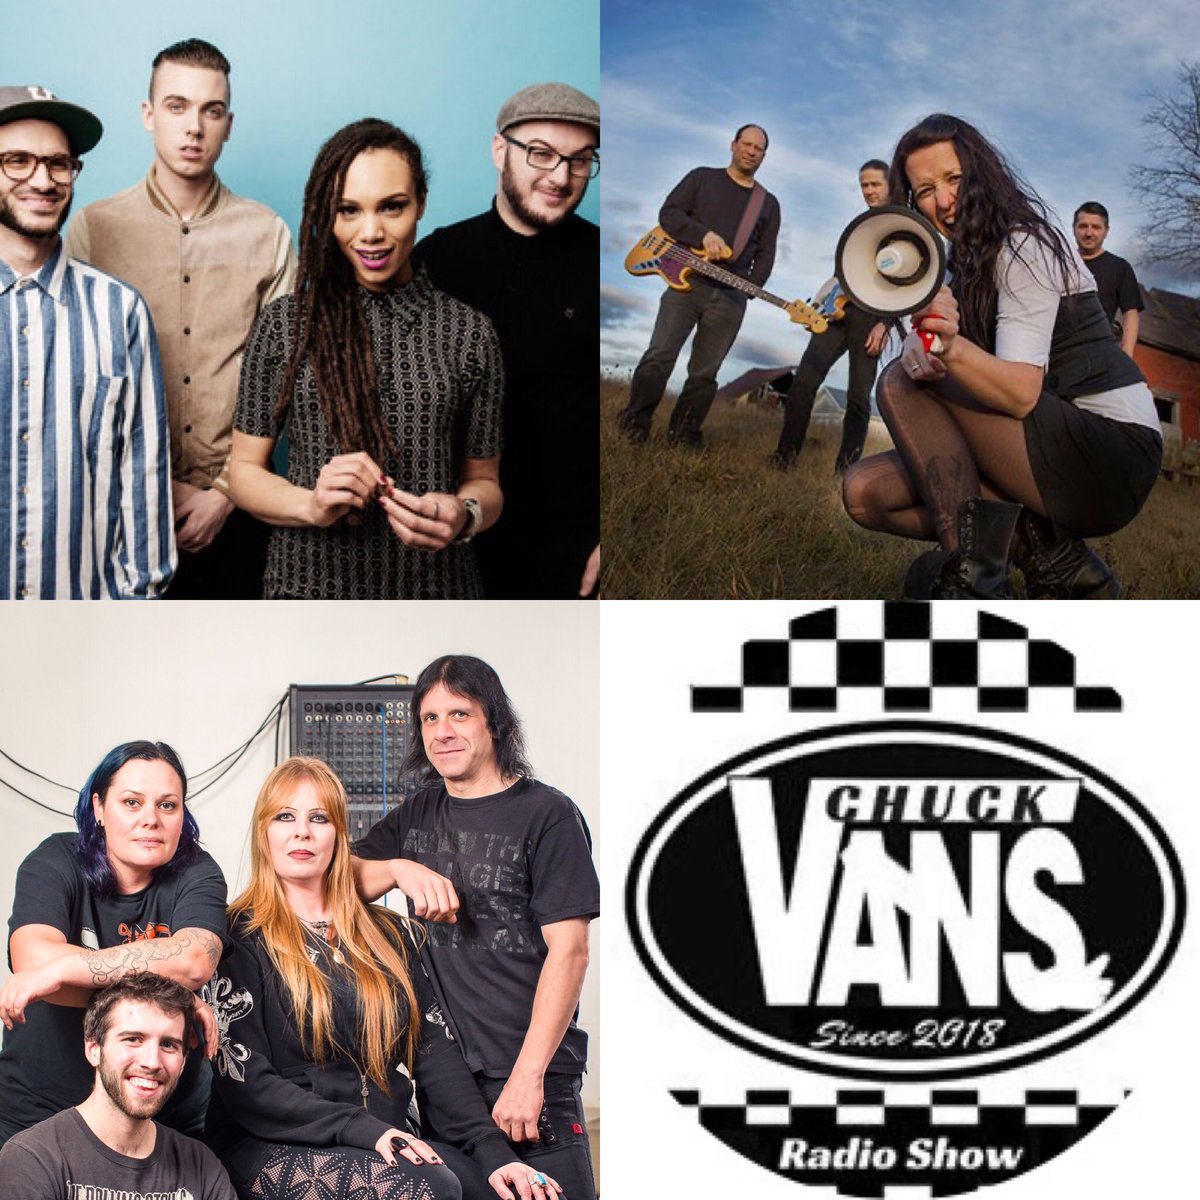 Today at 5pm CST an all new #ChuckVansShow on @Radio_WIGWAM with #NewMusic from #MarisaAndTheMoths @PJHarveyUK @gangstarr a spotlight on the band C*nts and music from @theskints @Unveil616 @rekkeningrocks and more!

radiowigwam.co.uk